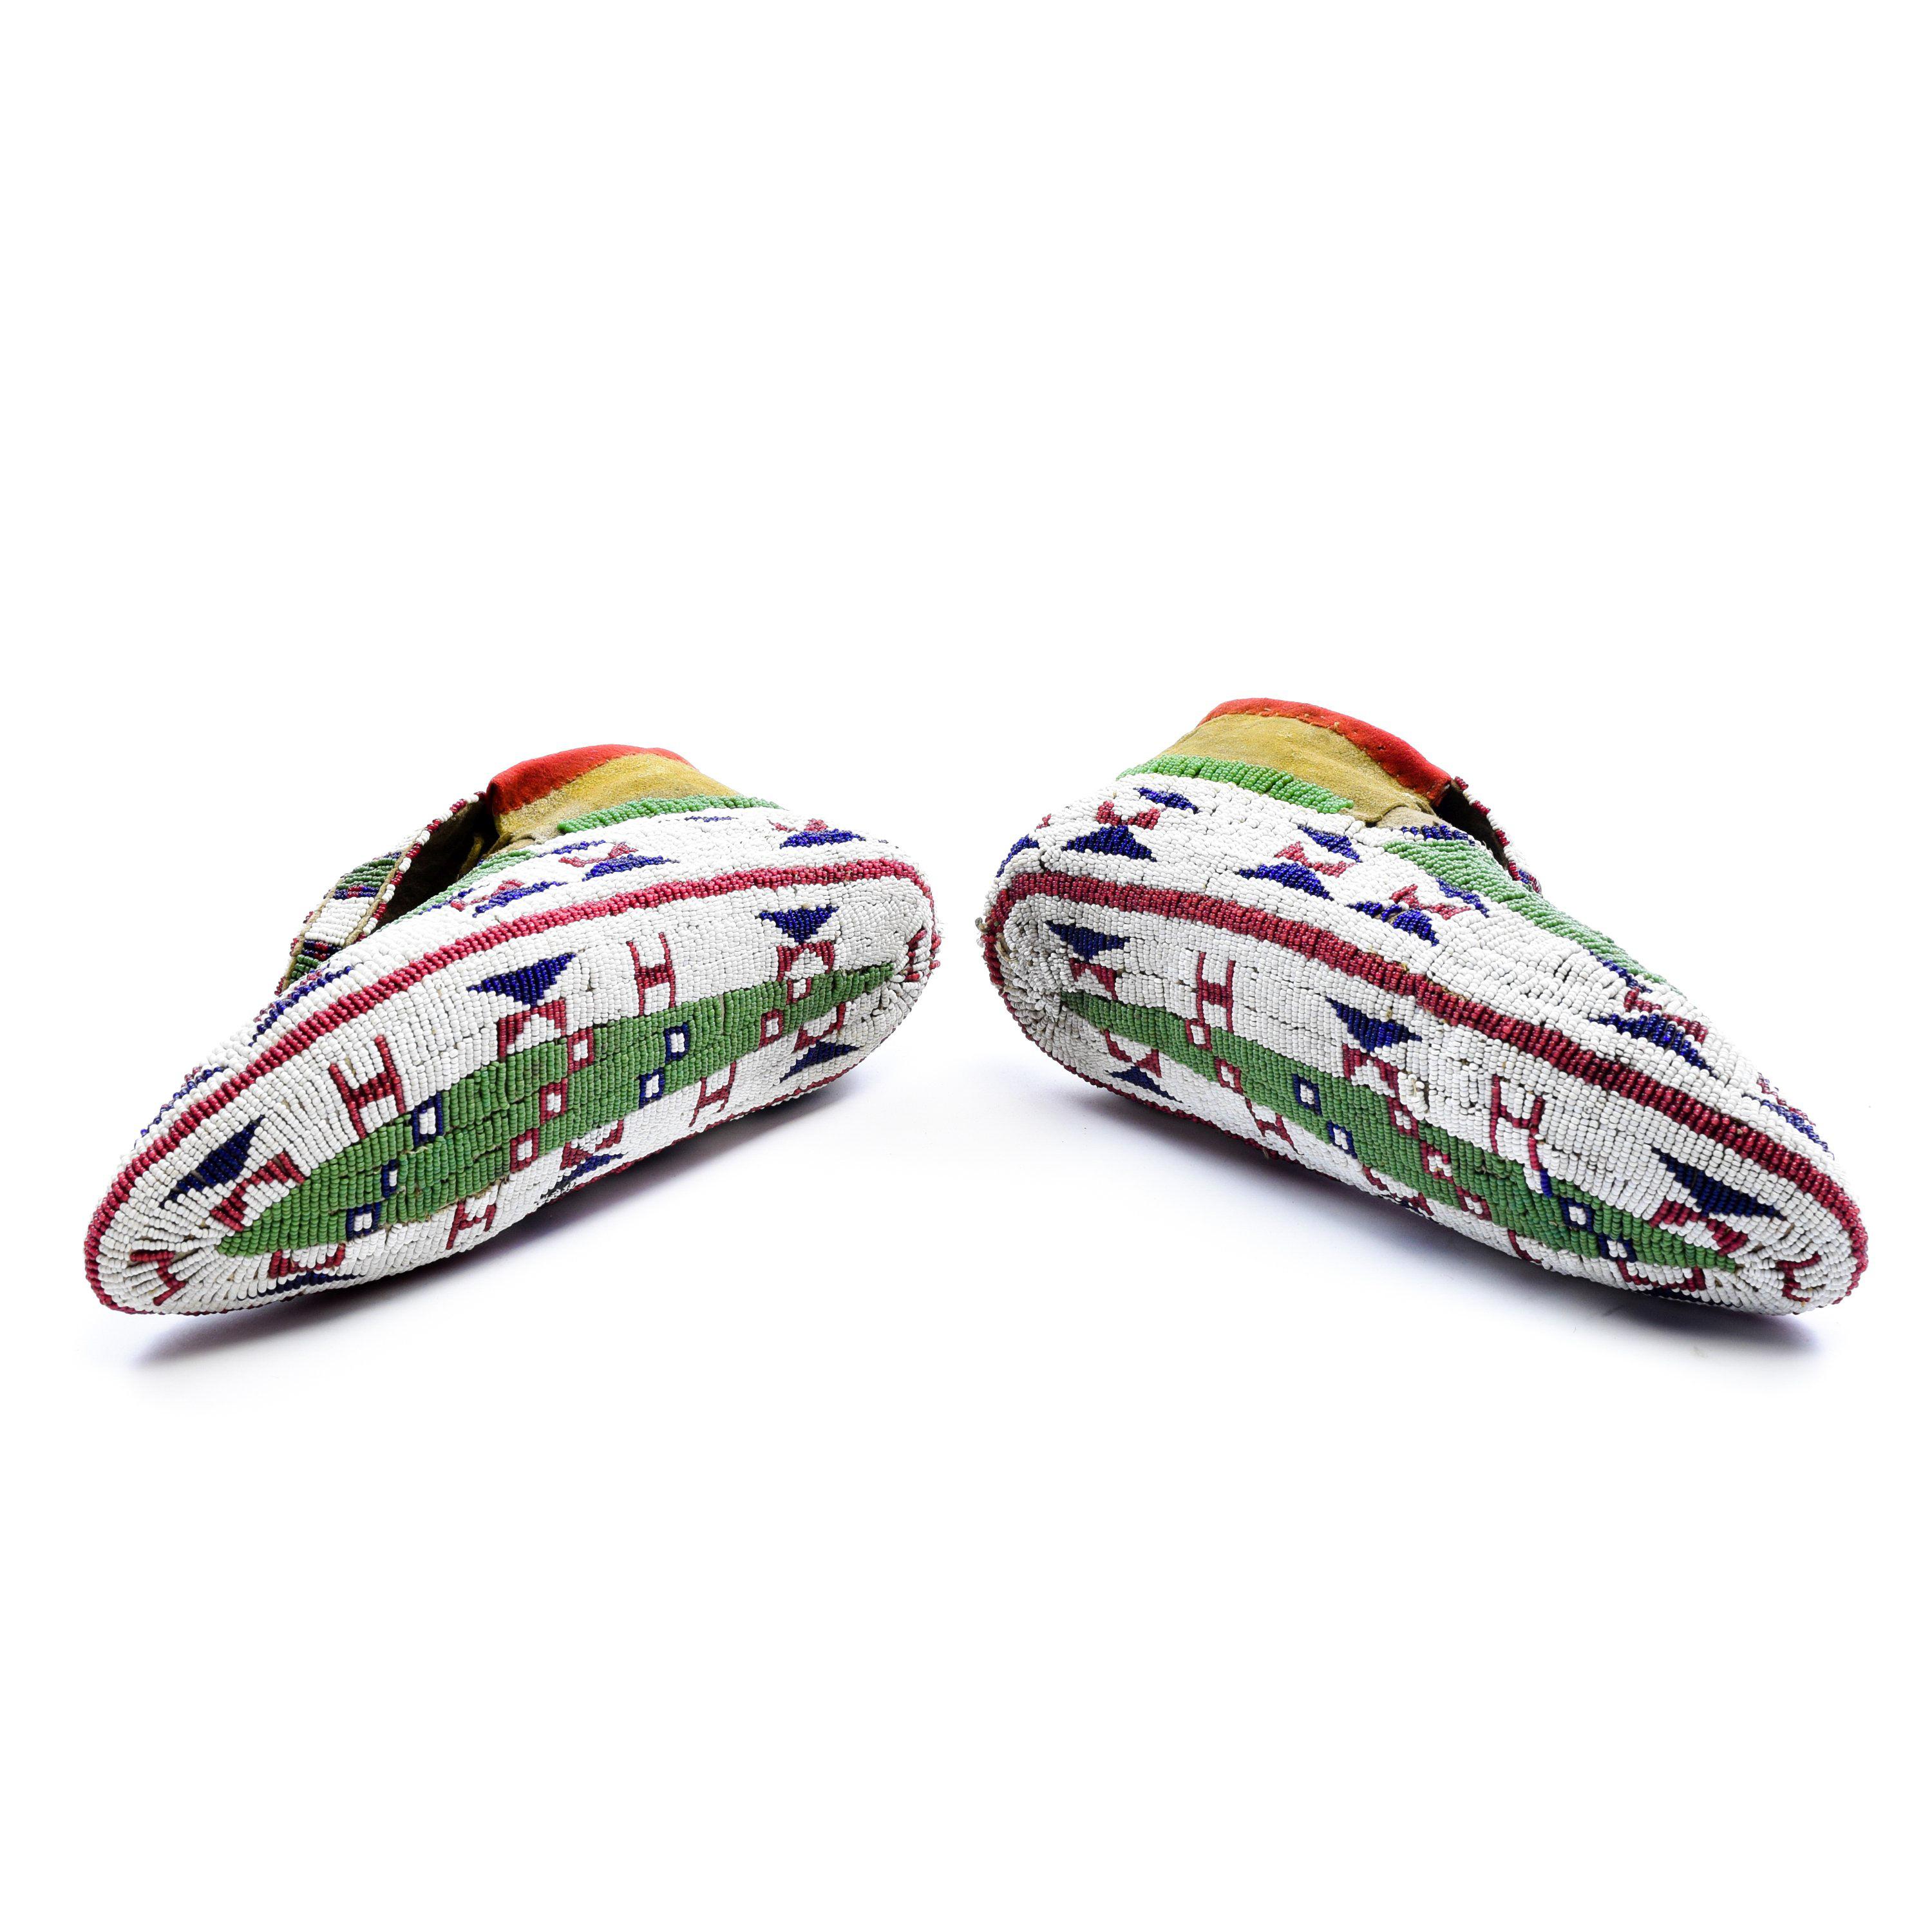 sioux moccasins for sale